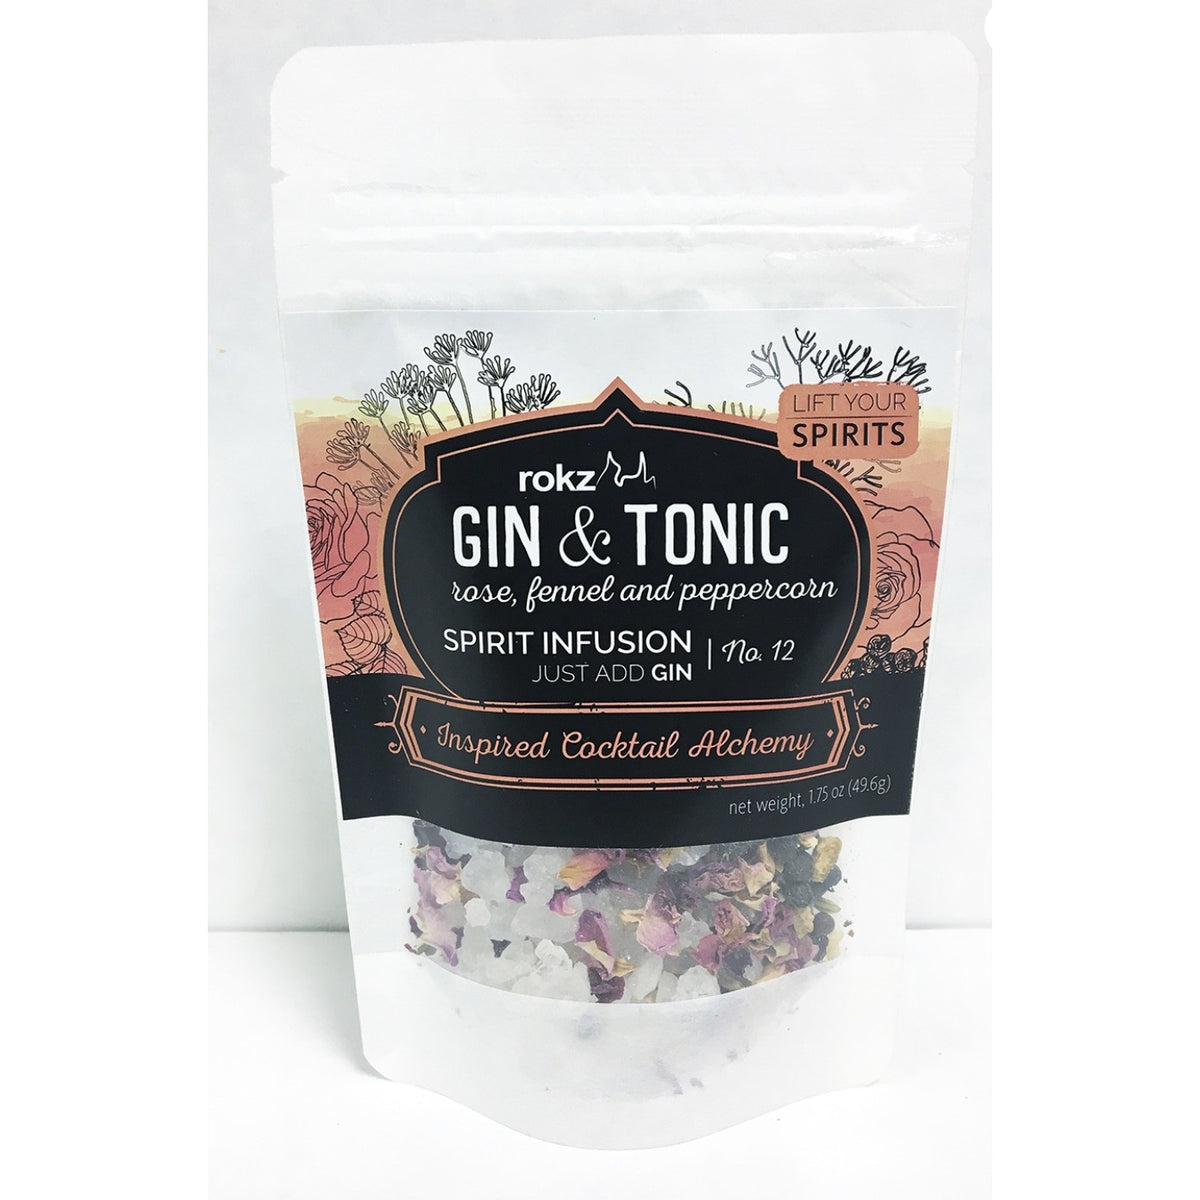 Rokz Gin & Tonic Infusion Refill Pack